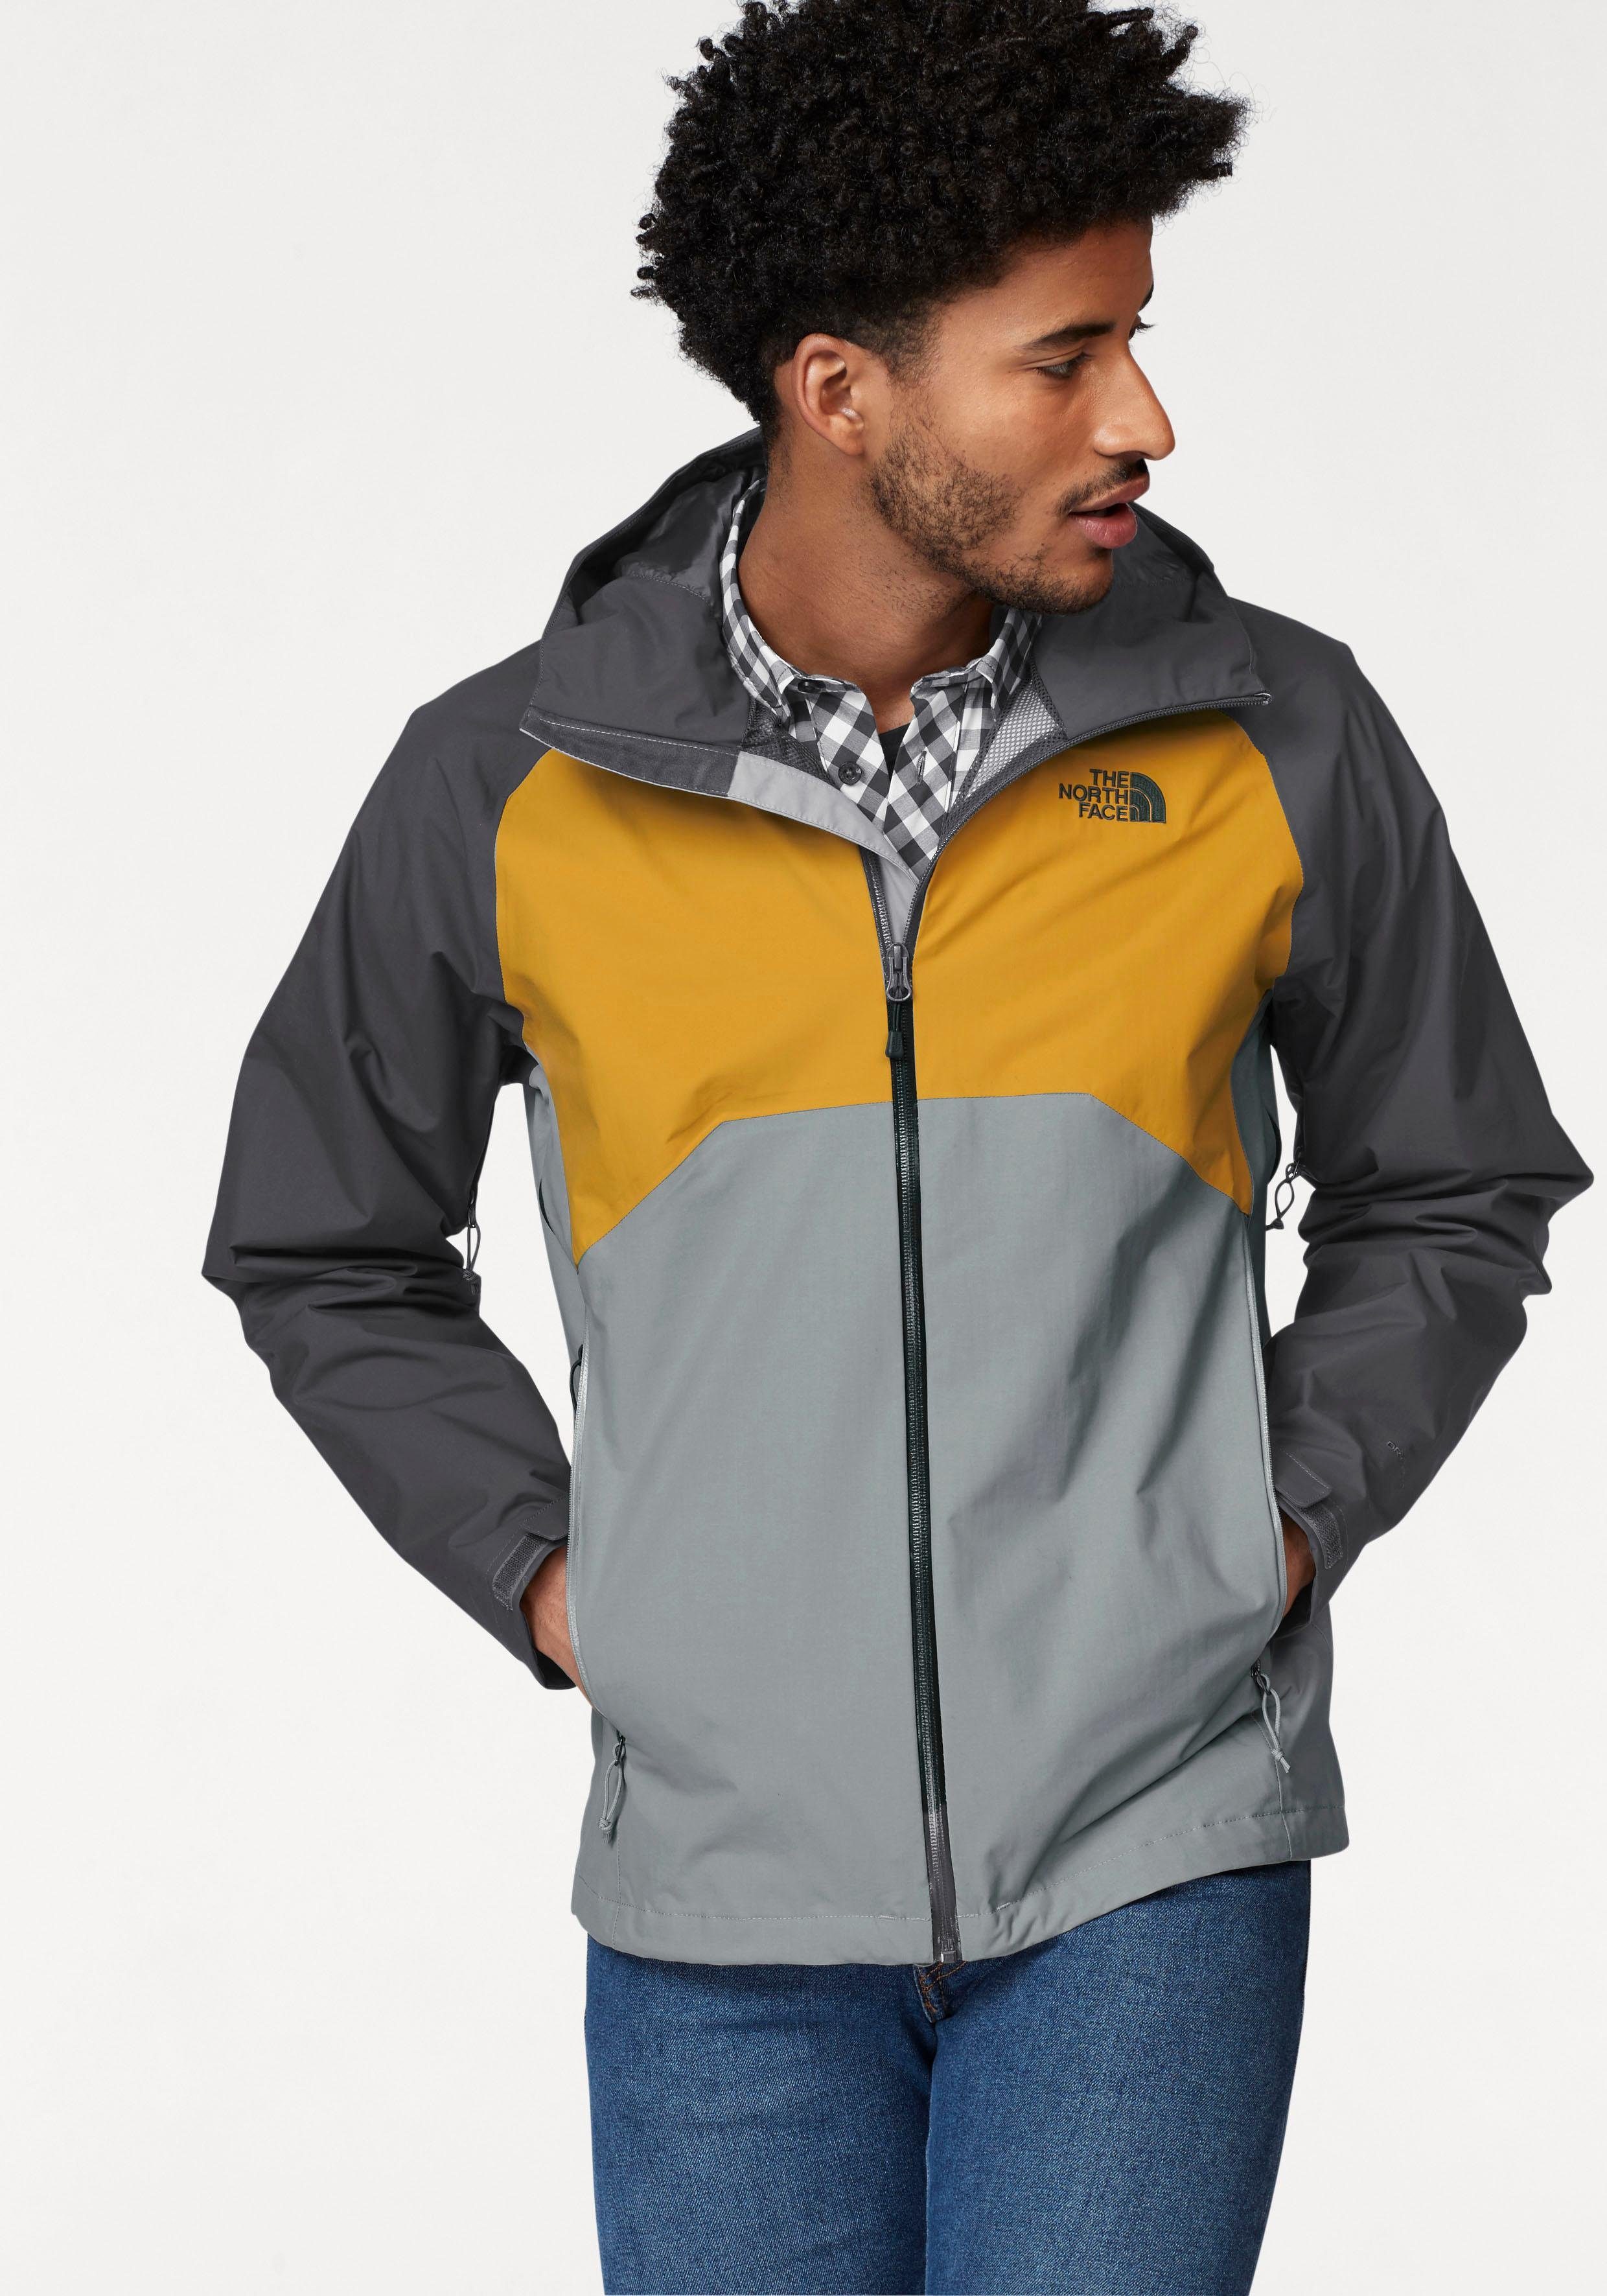 The North Face NU 15% KORTING: The North Face functioneel jack MENs STRATOS